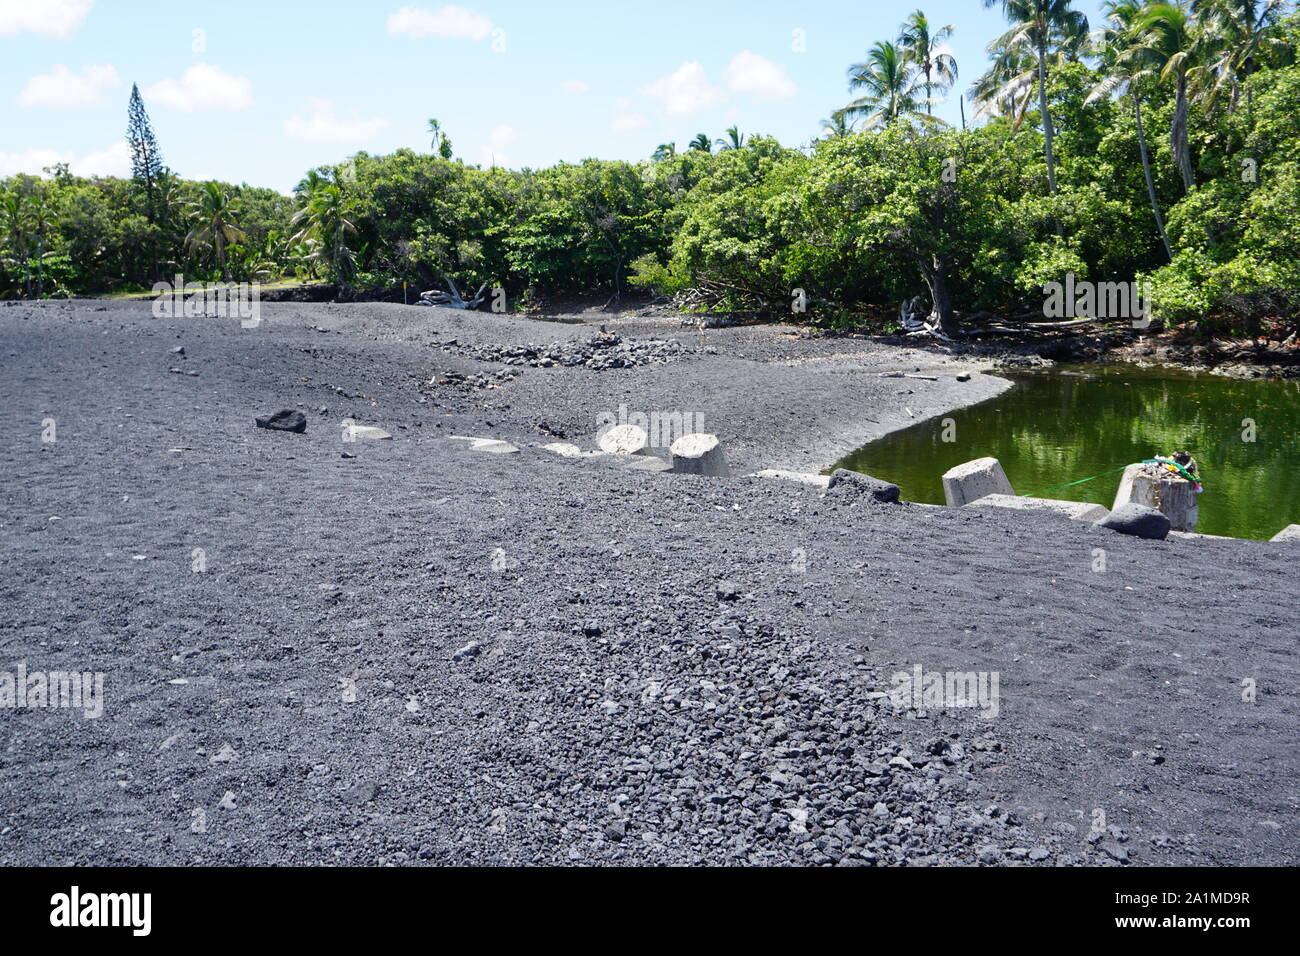 Pohoiki Beach, Hawaii's newest black sand beach, was formed by the 2018 eruptions of the Kilauea volcano. Stock Photo